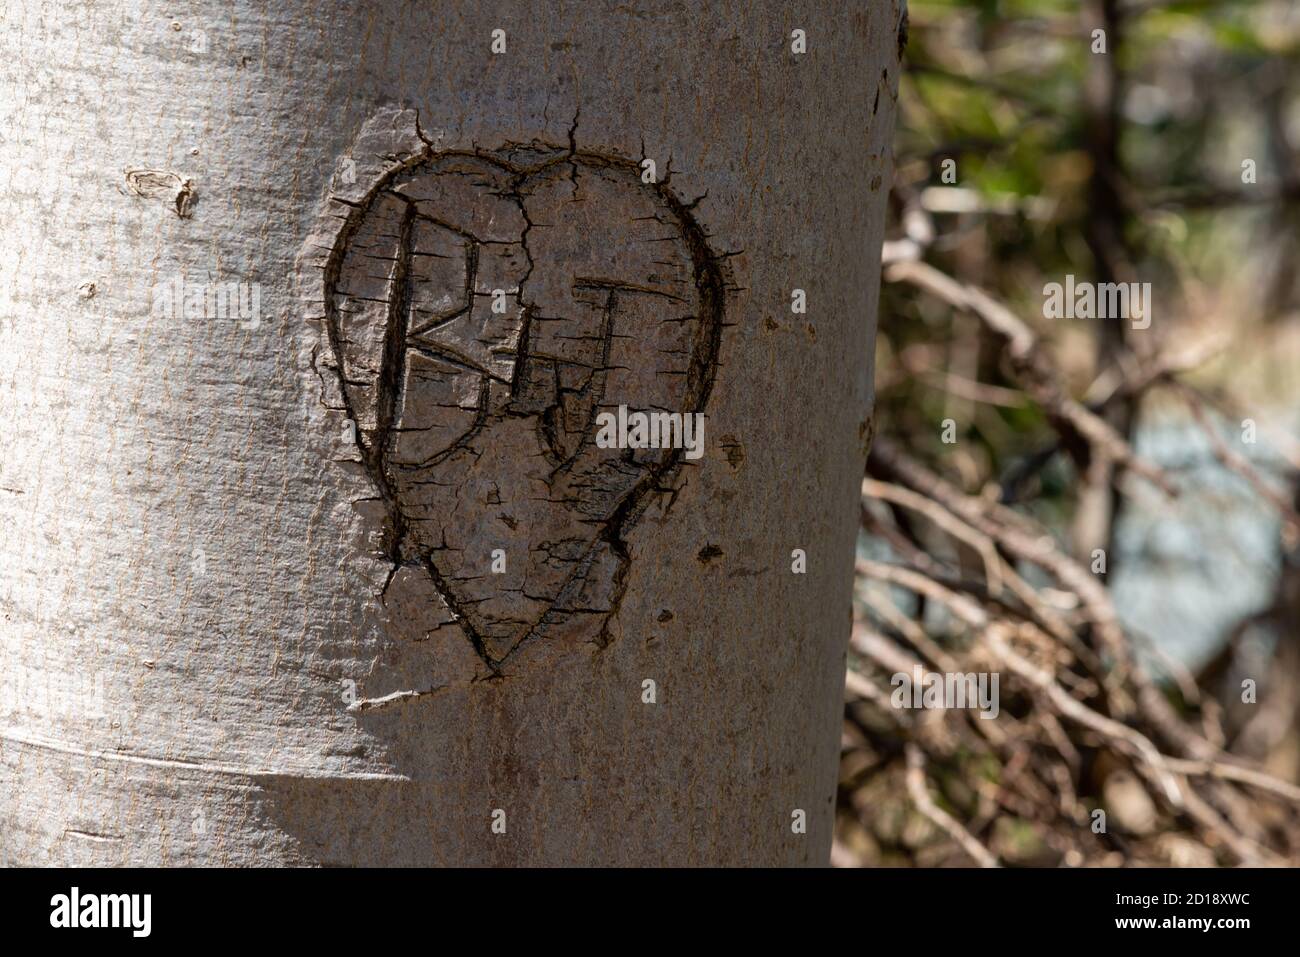 The letters B & J carved in a birch tree trunk. The letters have a heart shape or sign around the letters. Stock Photo